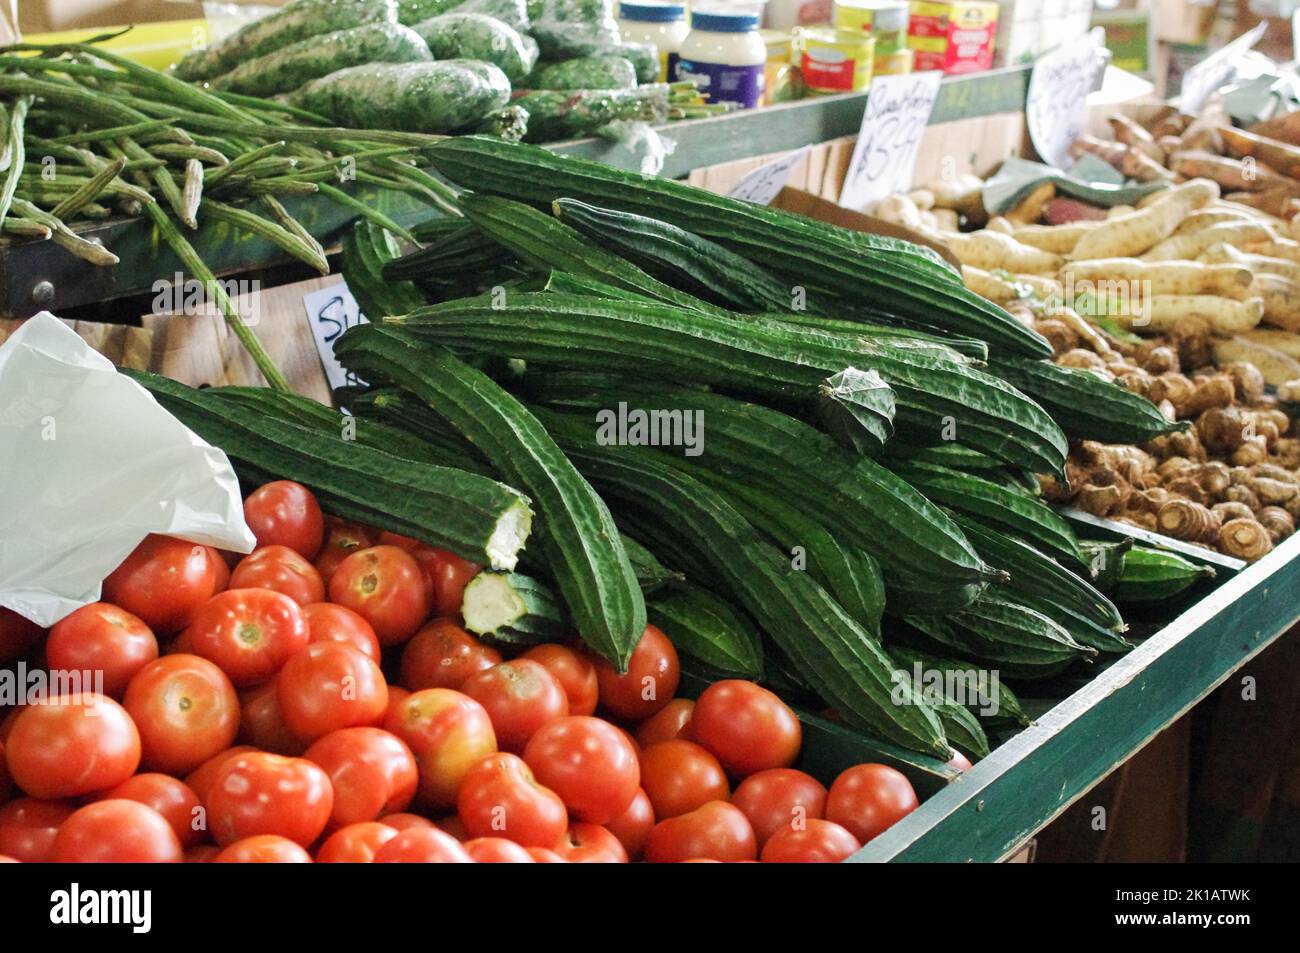 Tomatoes, snake beans, yams and silk squash (aka Chinese gourd, sin qua or luffa) for sale at Paddy’s Fresh Food Market in Flemington, Sydney Stock Photo